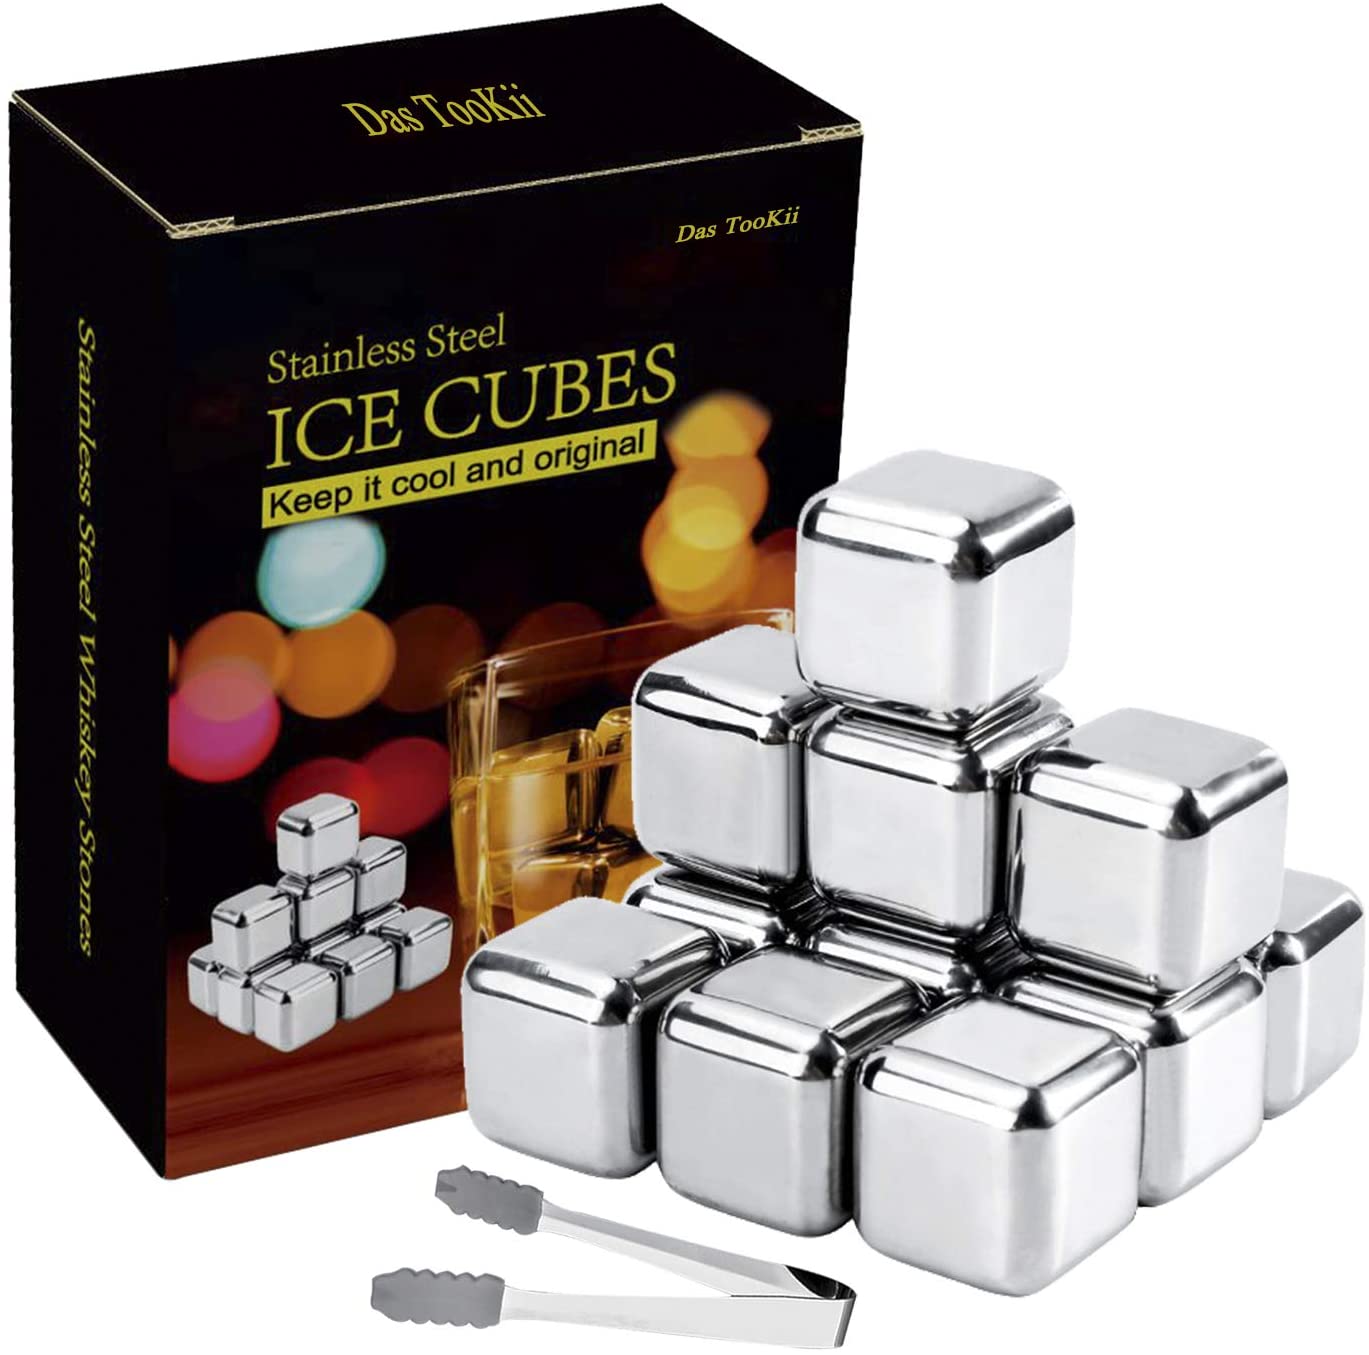 New Arrival China Barware Gift -  FDA Stainless Whiskey Stone Stainless Steel Ice Cubes Reusable Chilling Gift Sets for Family  Friends  – Shunstone